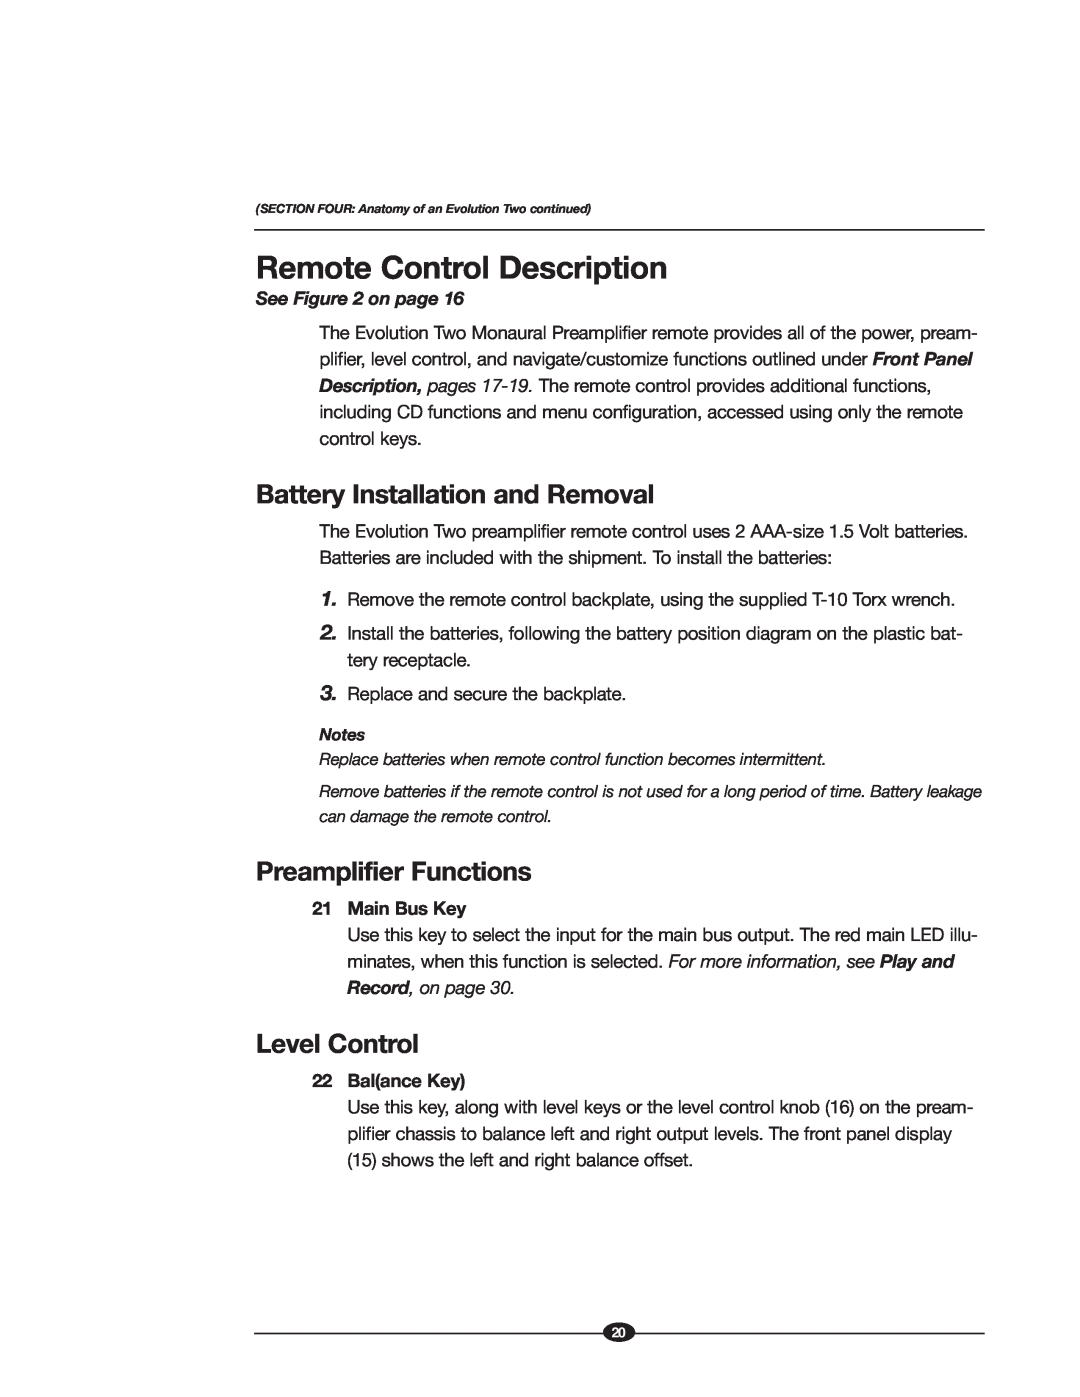 Krell Industries EVOLUTION TWO MONAURAL PREAMPLIFIER manual Remote Control Description, Battery Installation and Removal 